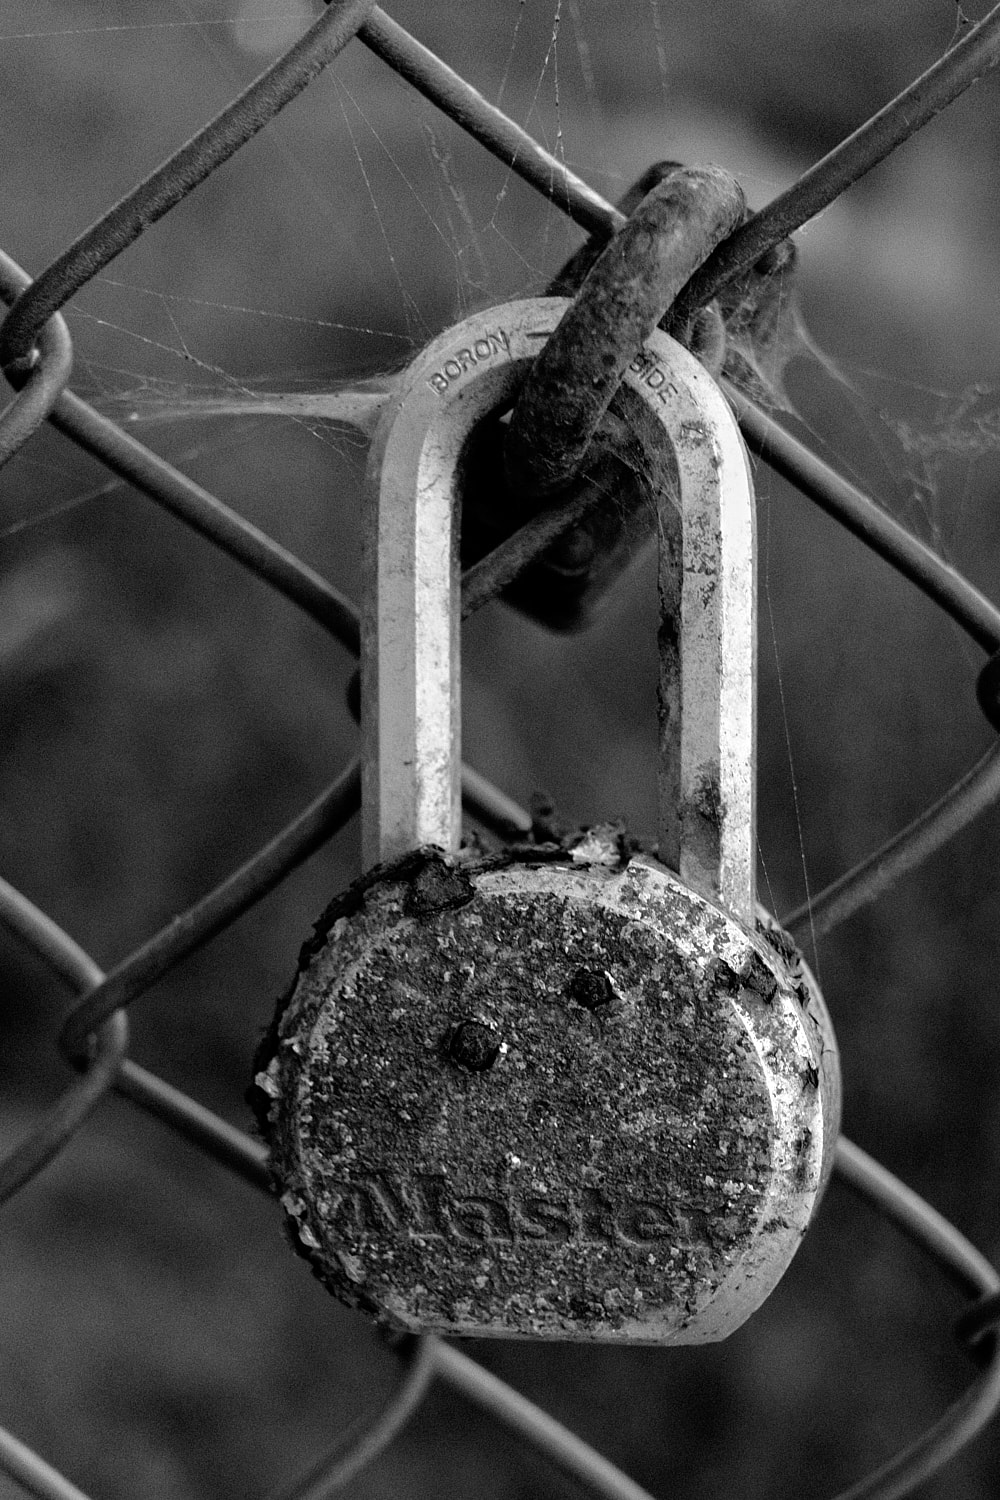 Black and white portrait photo of a rusty beaten up lock, locked to a chain link fence.